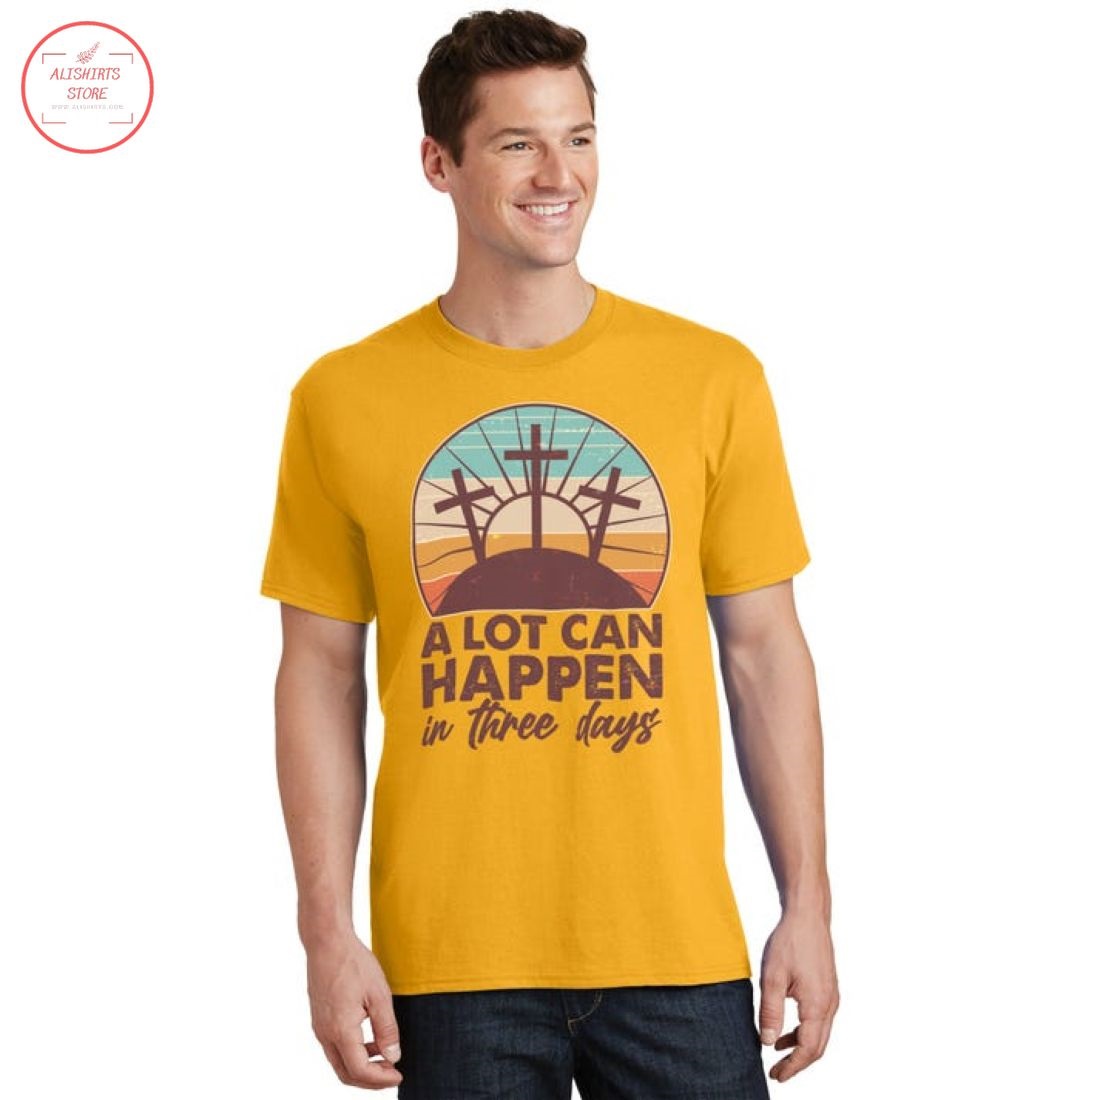 A Lot Can Happen in Three Days Jesus Resurrection Shirt